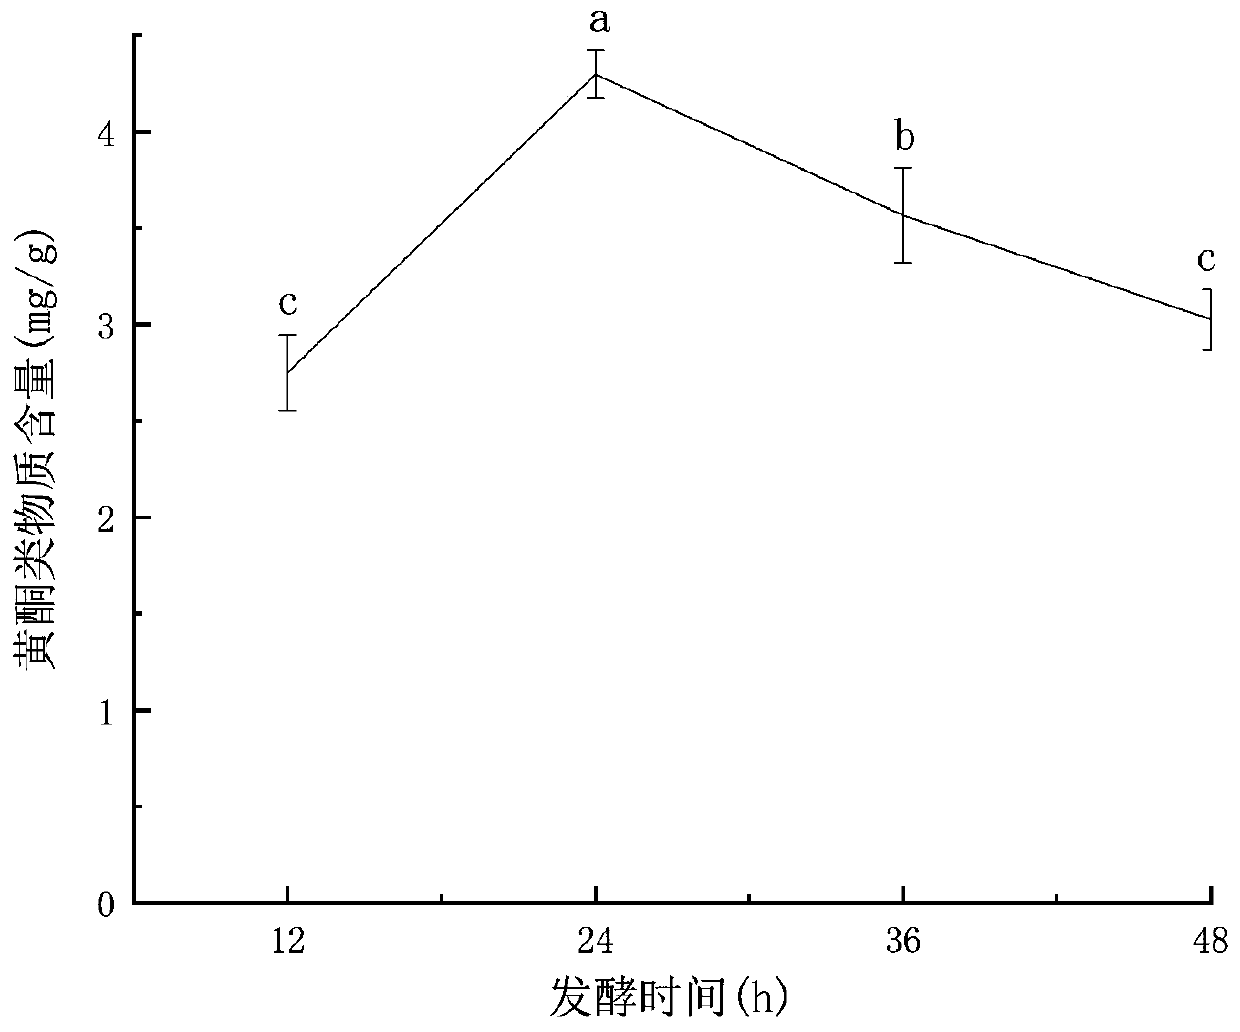 Method for producing flavonoid substances by fermenting vegetable soybean off-grade goods with bacillus natto